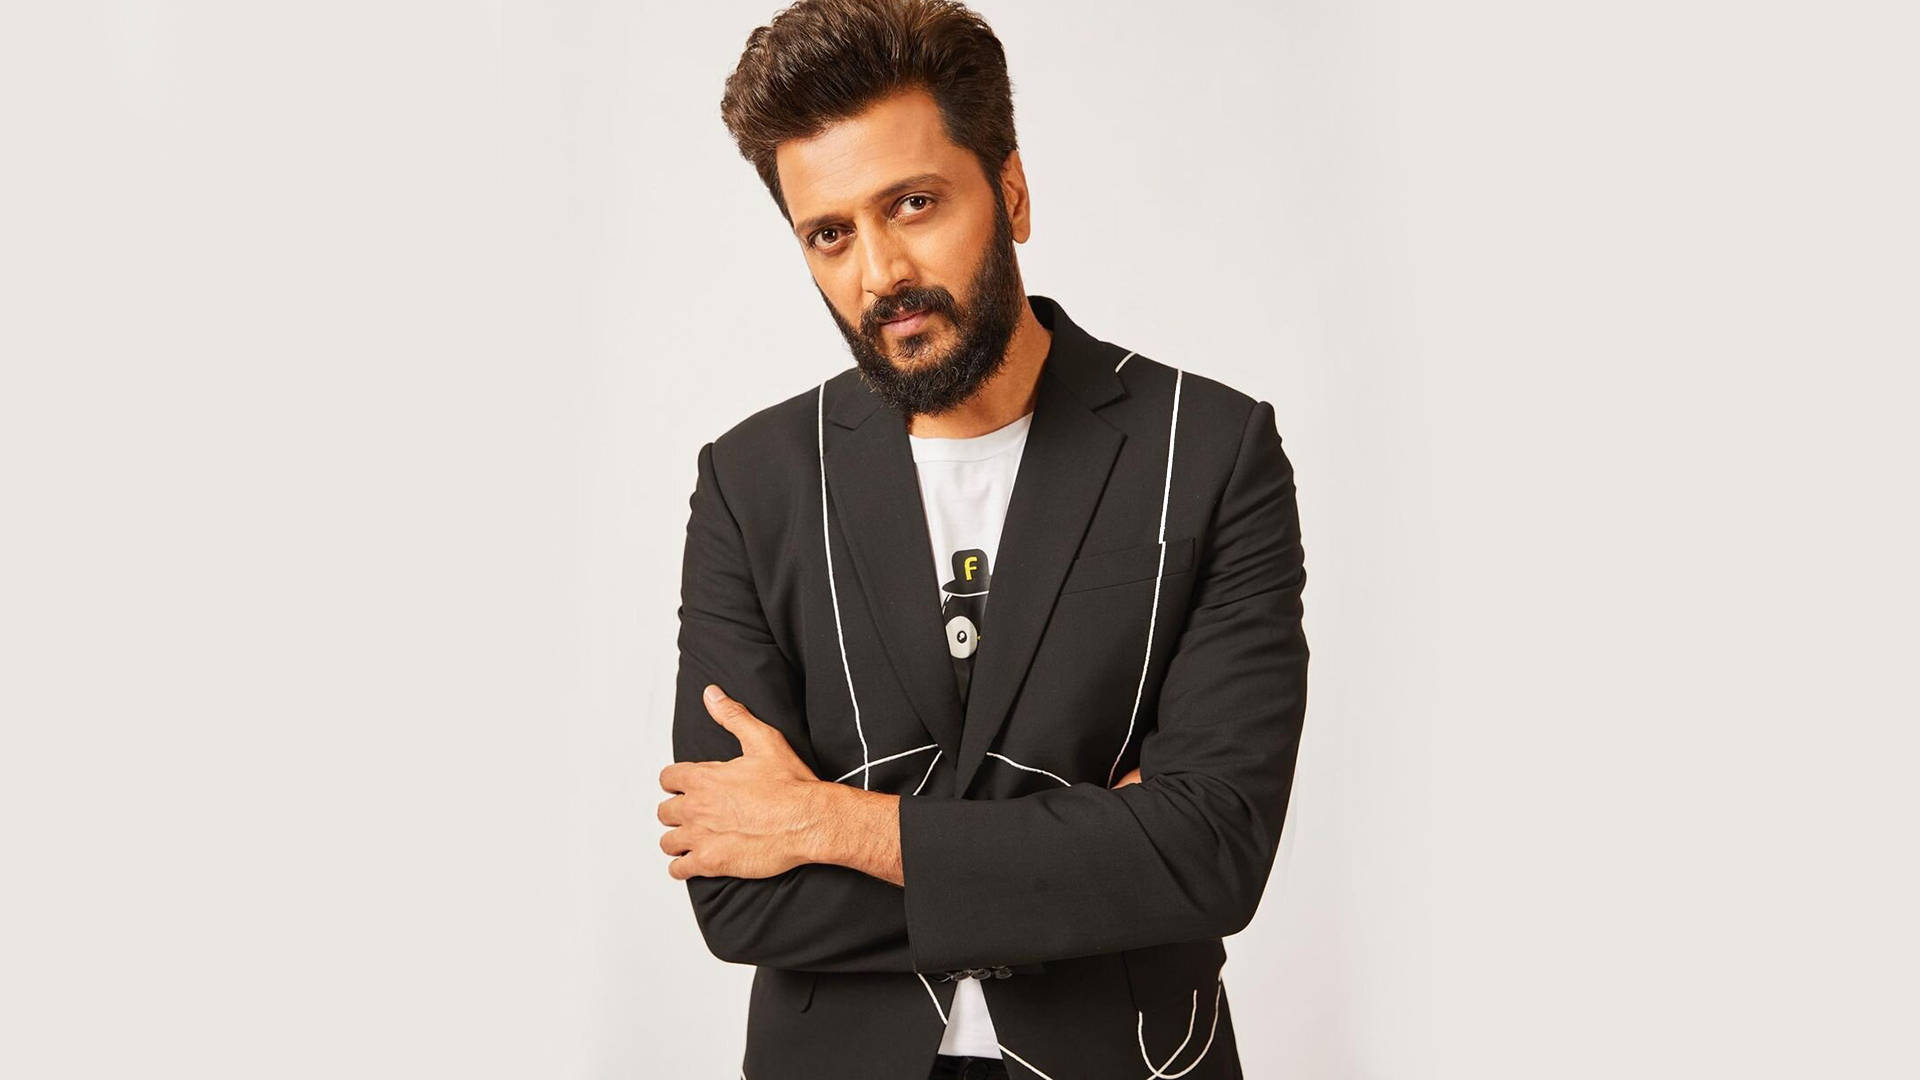 Actor Riteish Deshmukh Disappointed After Star India Batsman Left Out of T20 World Cup Squad